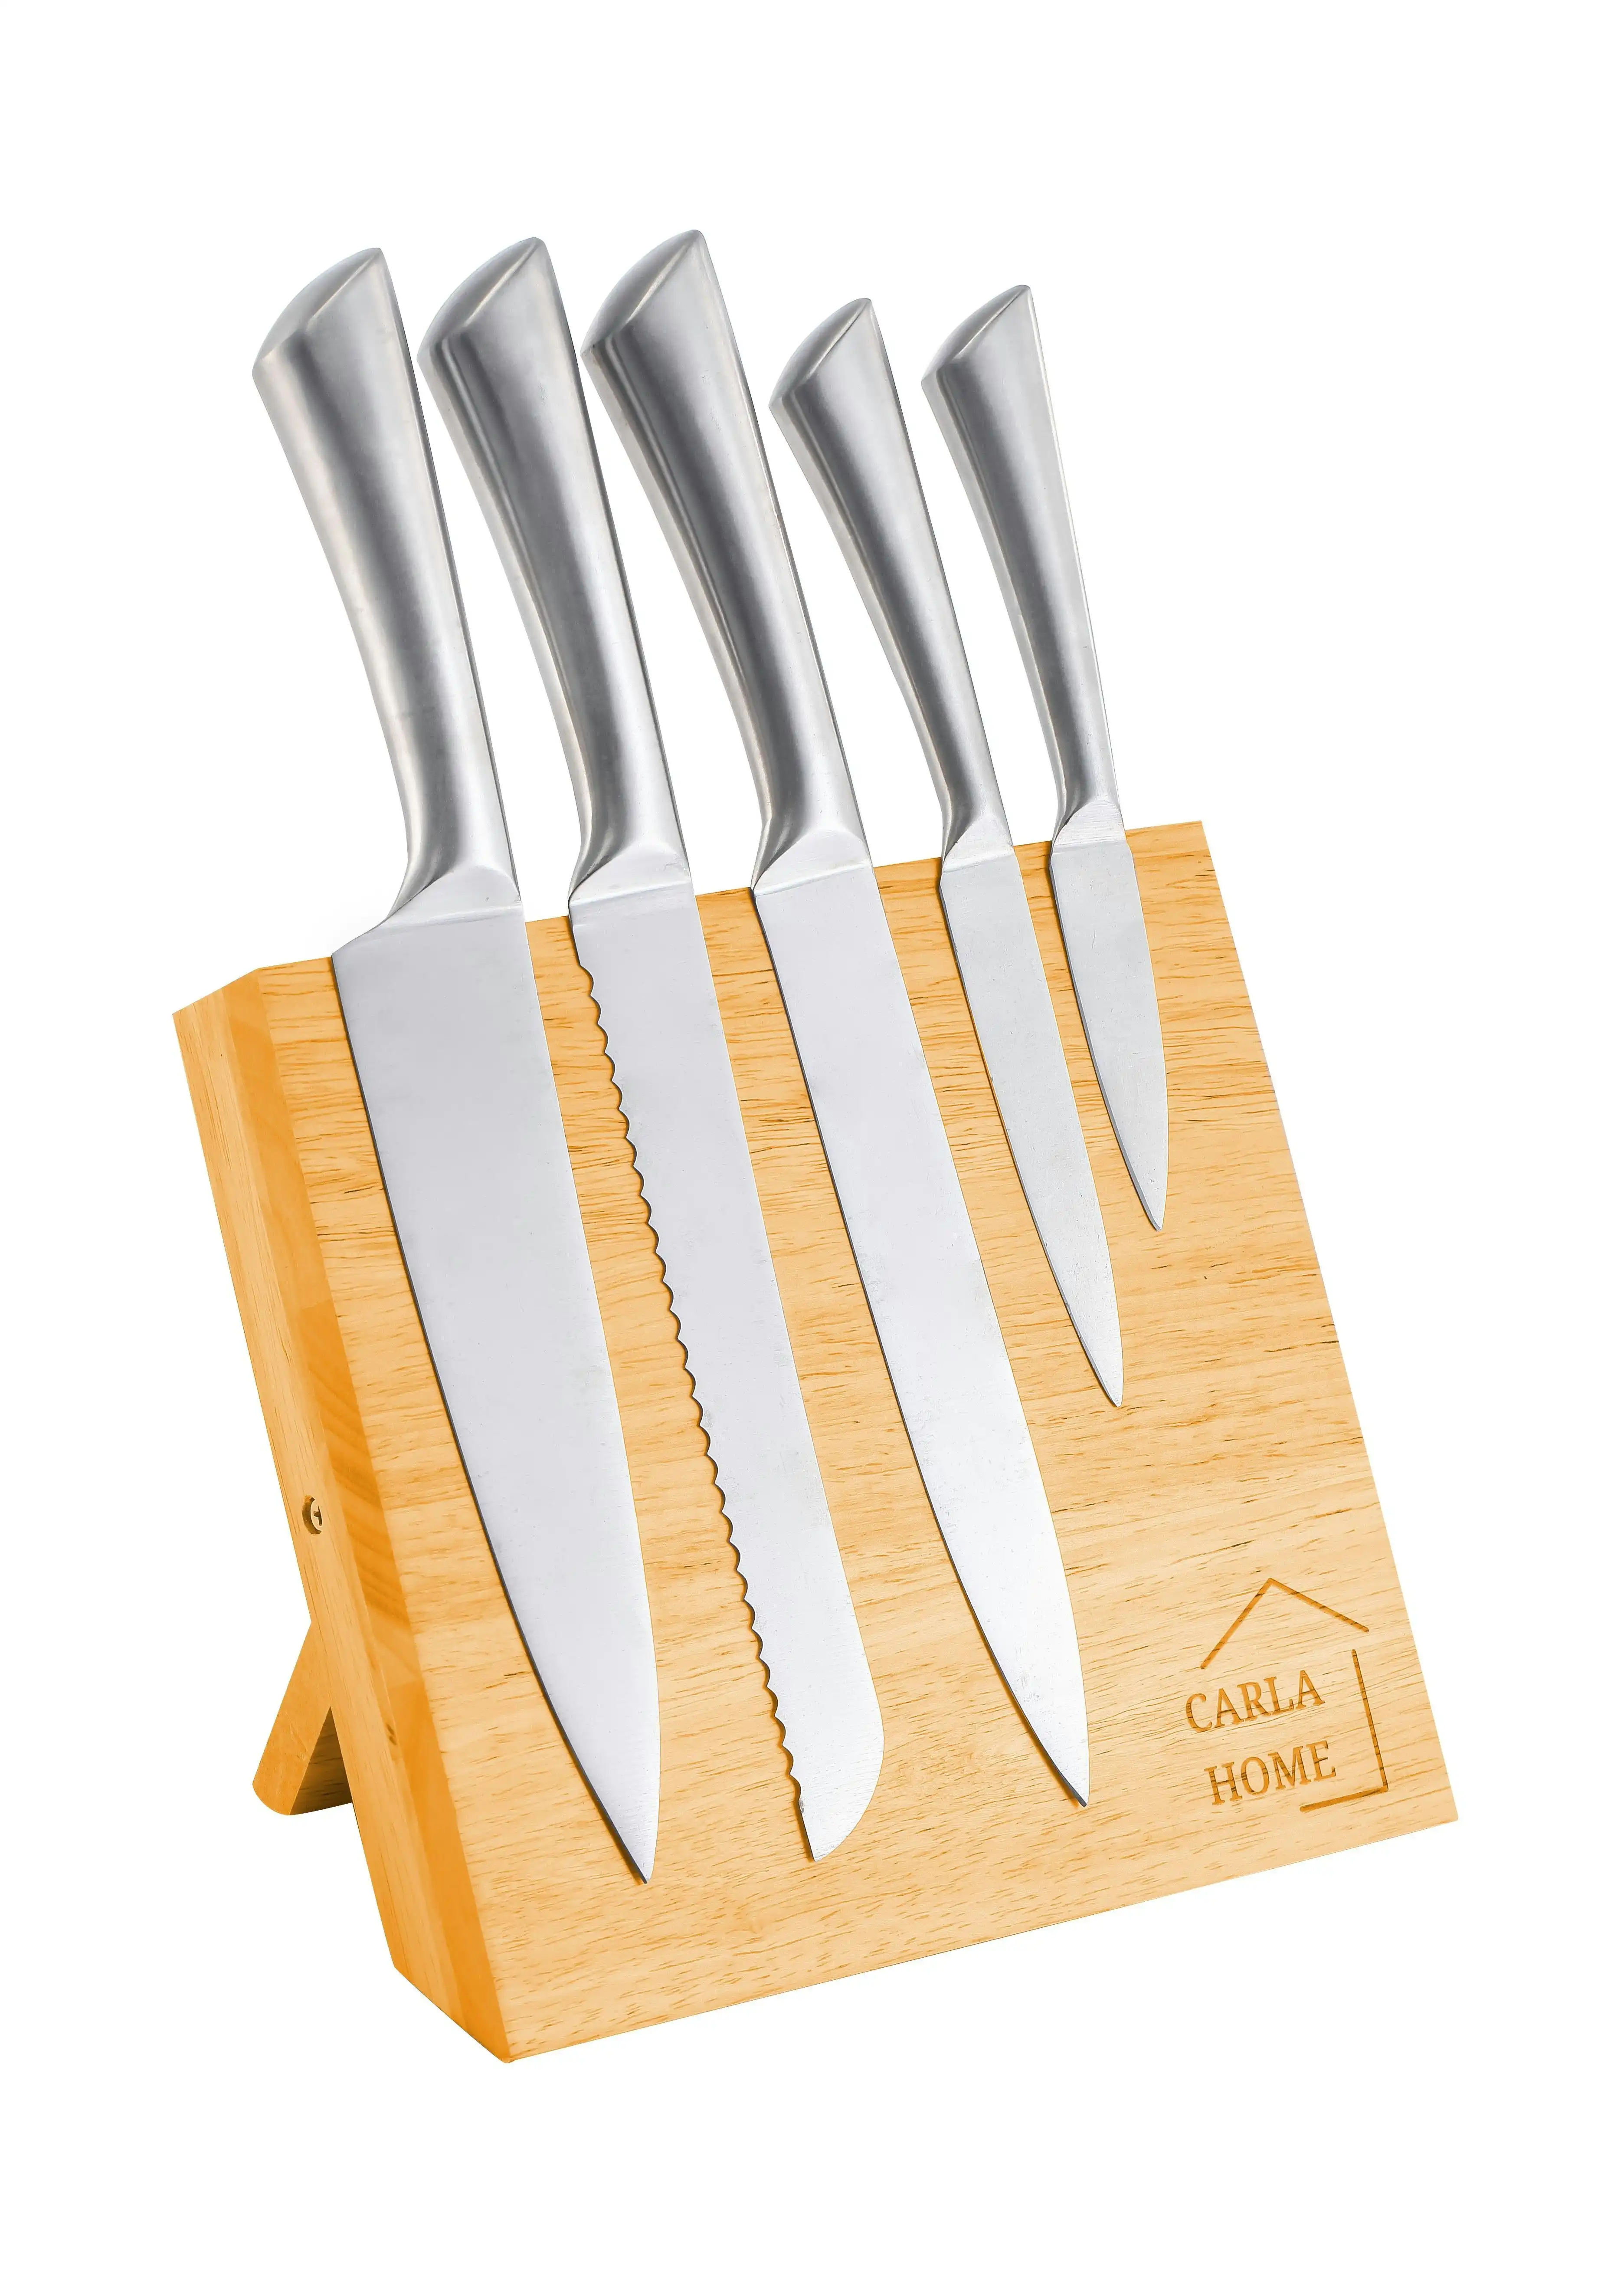 Carla Home Natural Bamboo Magnetic Knife Block Holder with Strong Magnets for Home Kitchen Storage & Organisation